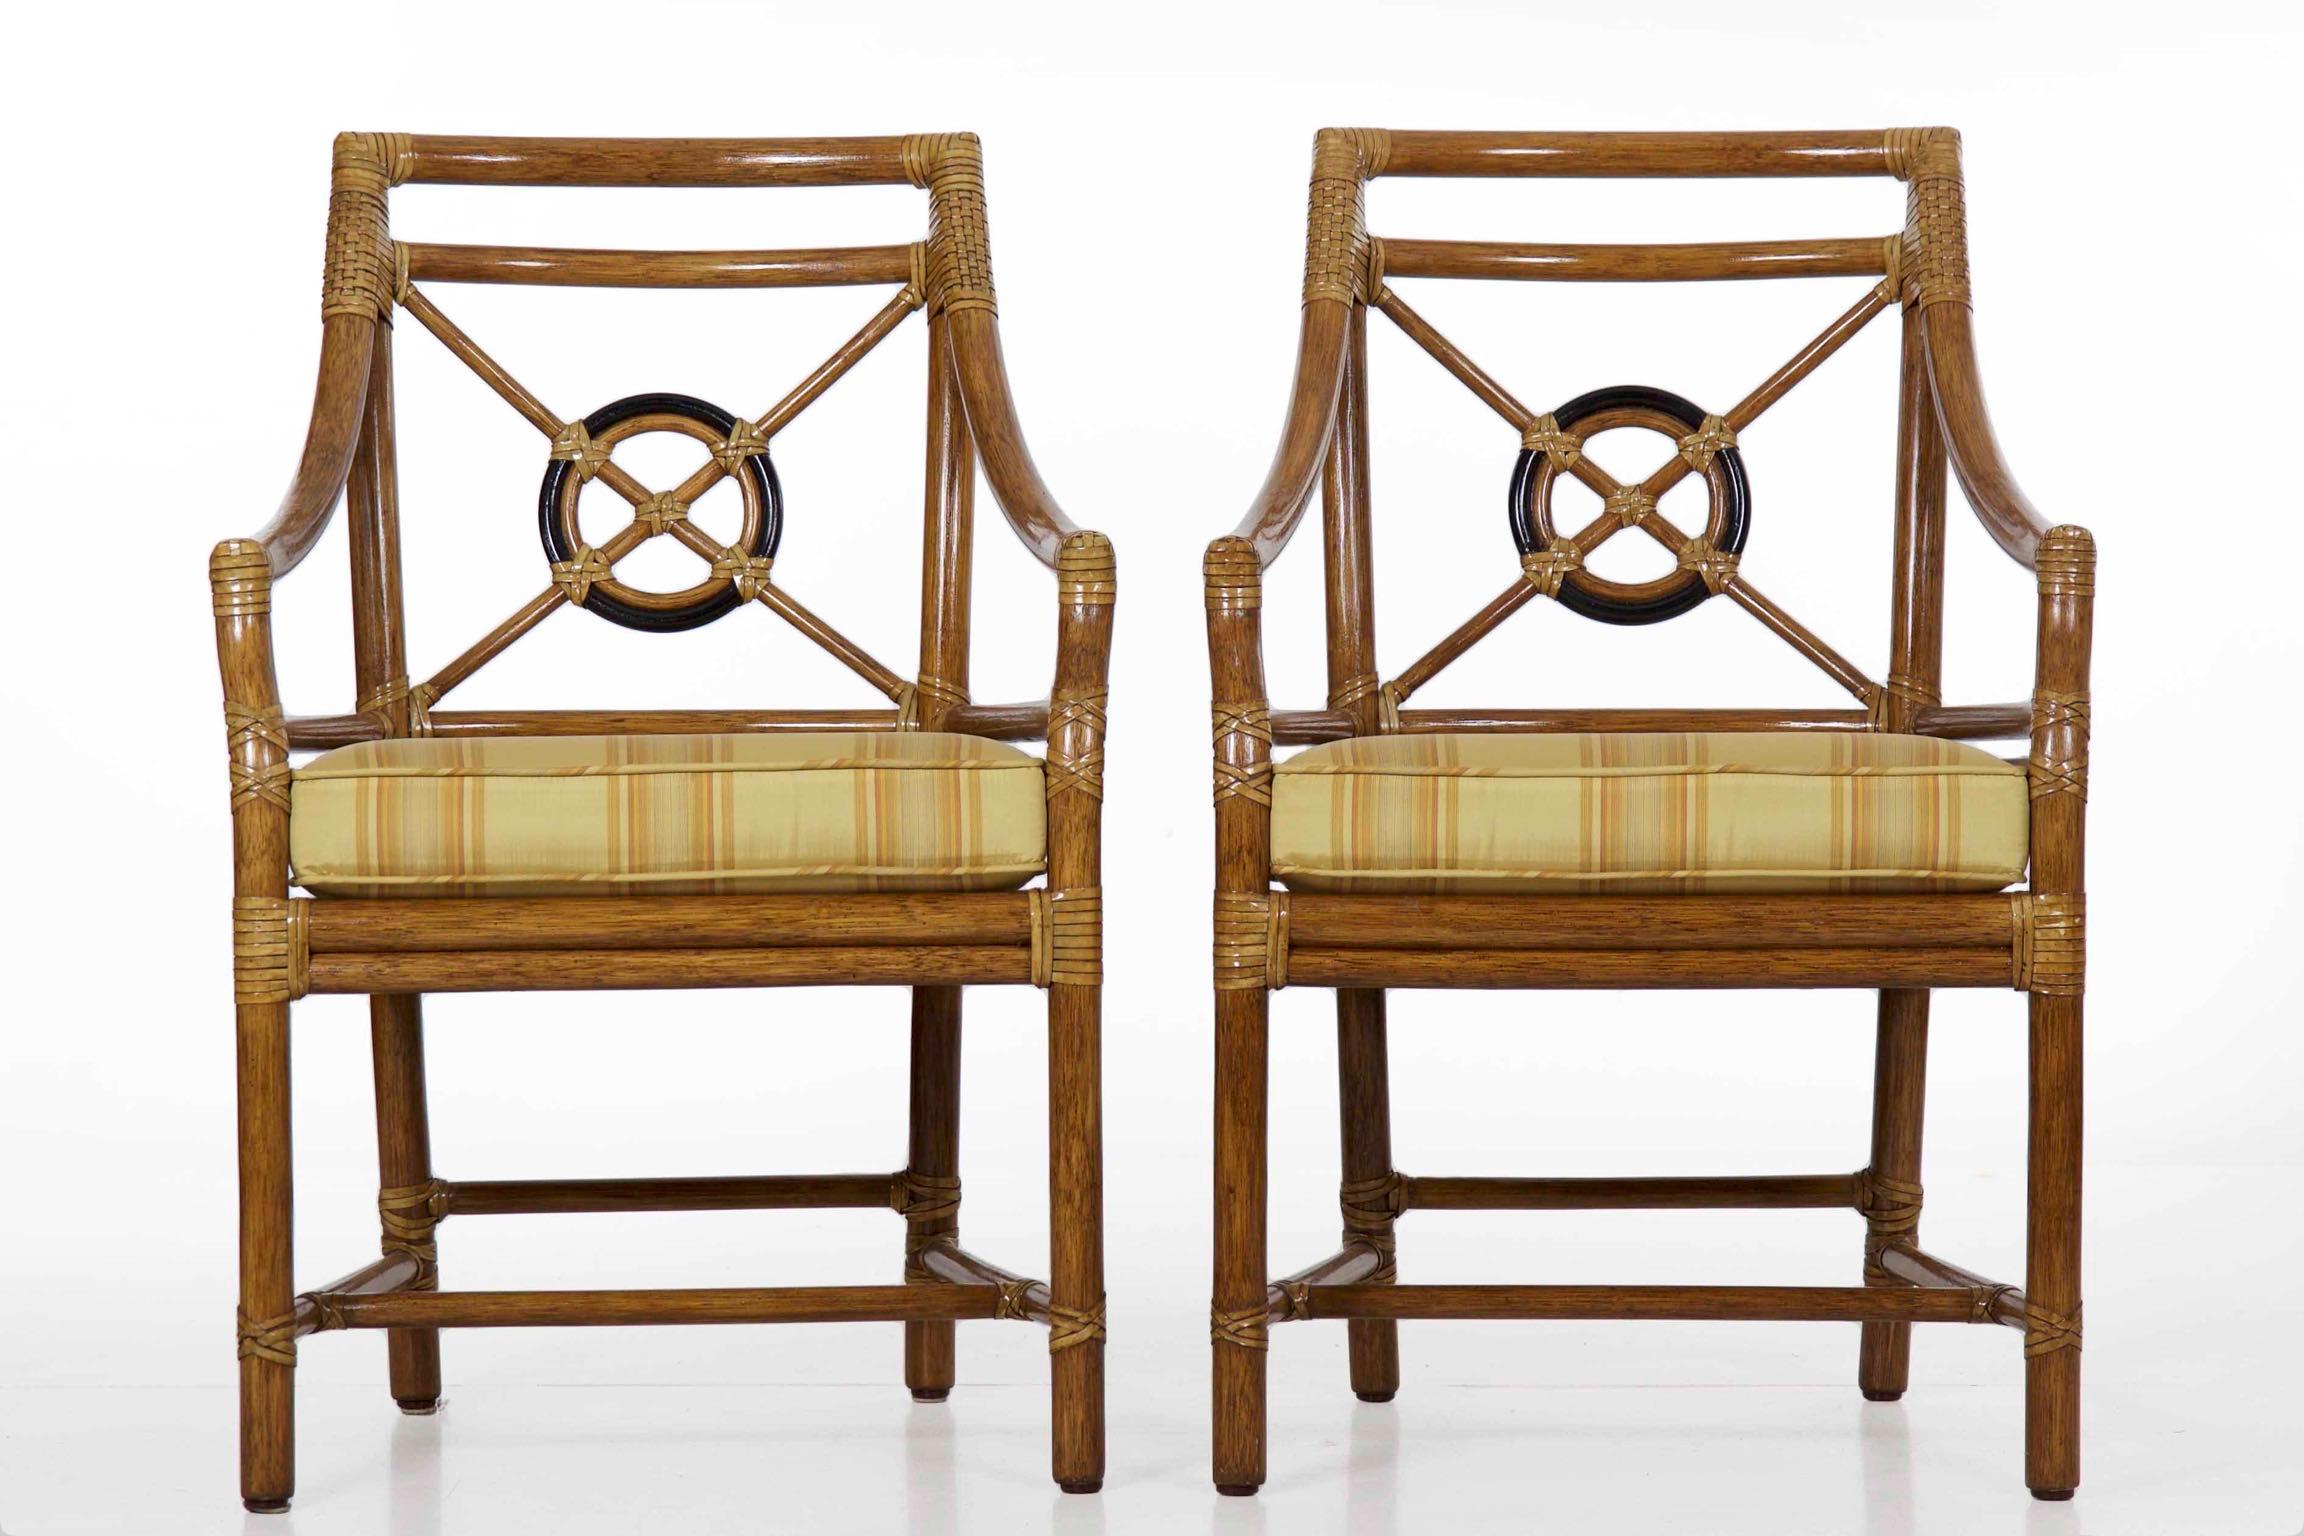 Vintage set of eight rattan dining armchairs
by McGuire of San Francisco, circa late 20th century.

This is a gorgeous set of eight rattan dining arm chairs retailed by McGuire in San Francisco during the last quarter of the 20th century. They